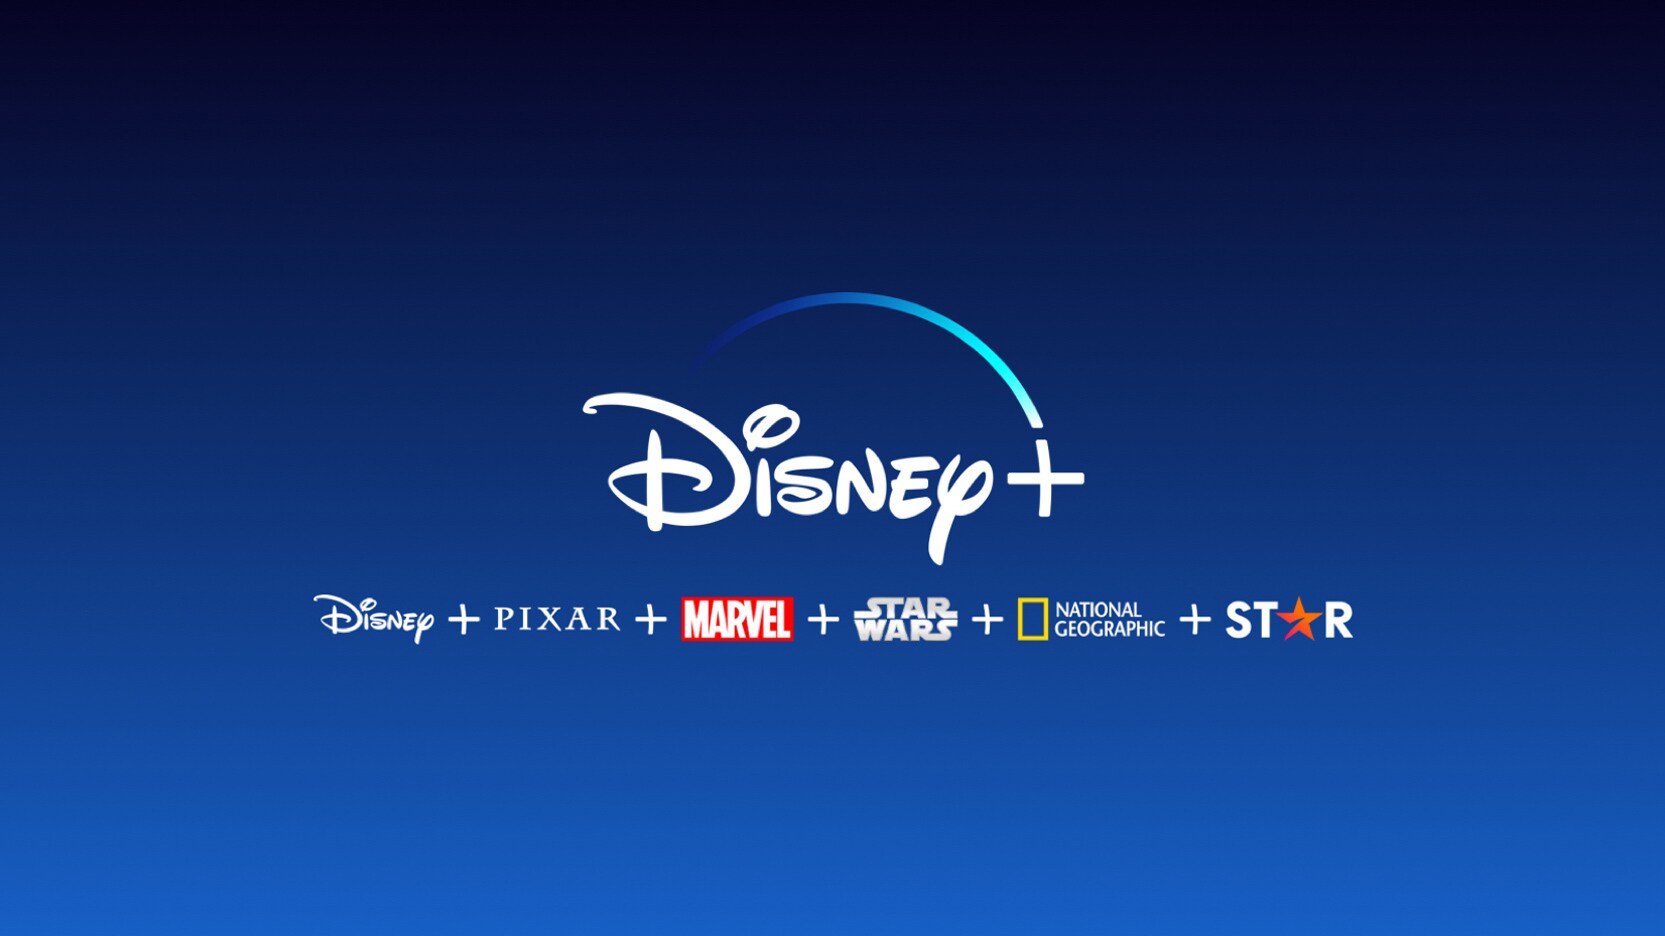 Disney+ presents Q&A with Marvel Studios’ Kevin Feige and panels ‘Big Shot’ and ‘The Mighty Ducks: Game changers’ at 2021 television critics association winter press tour